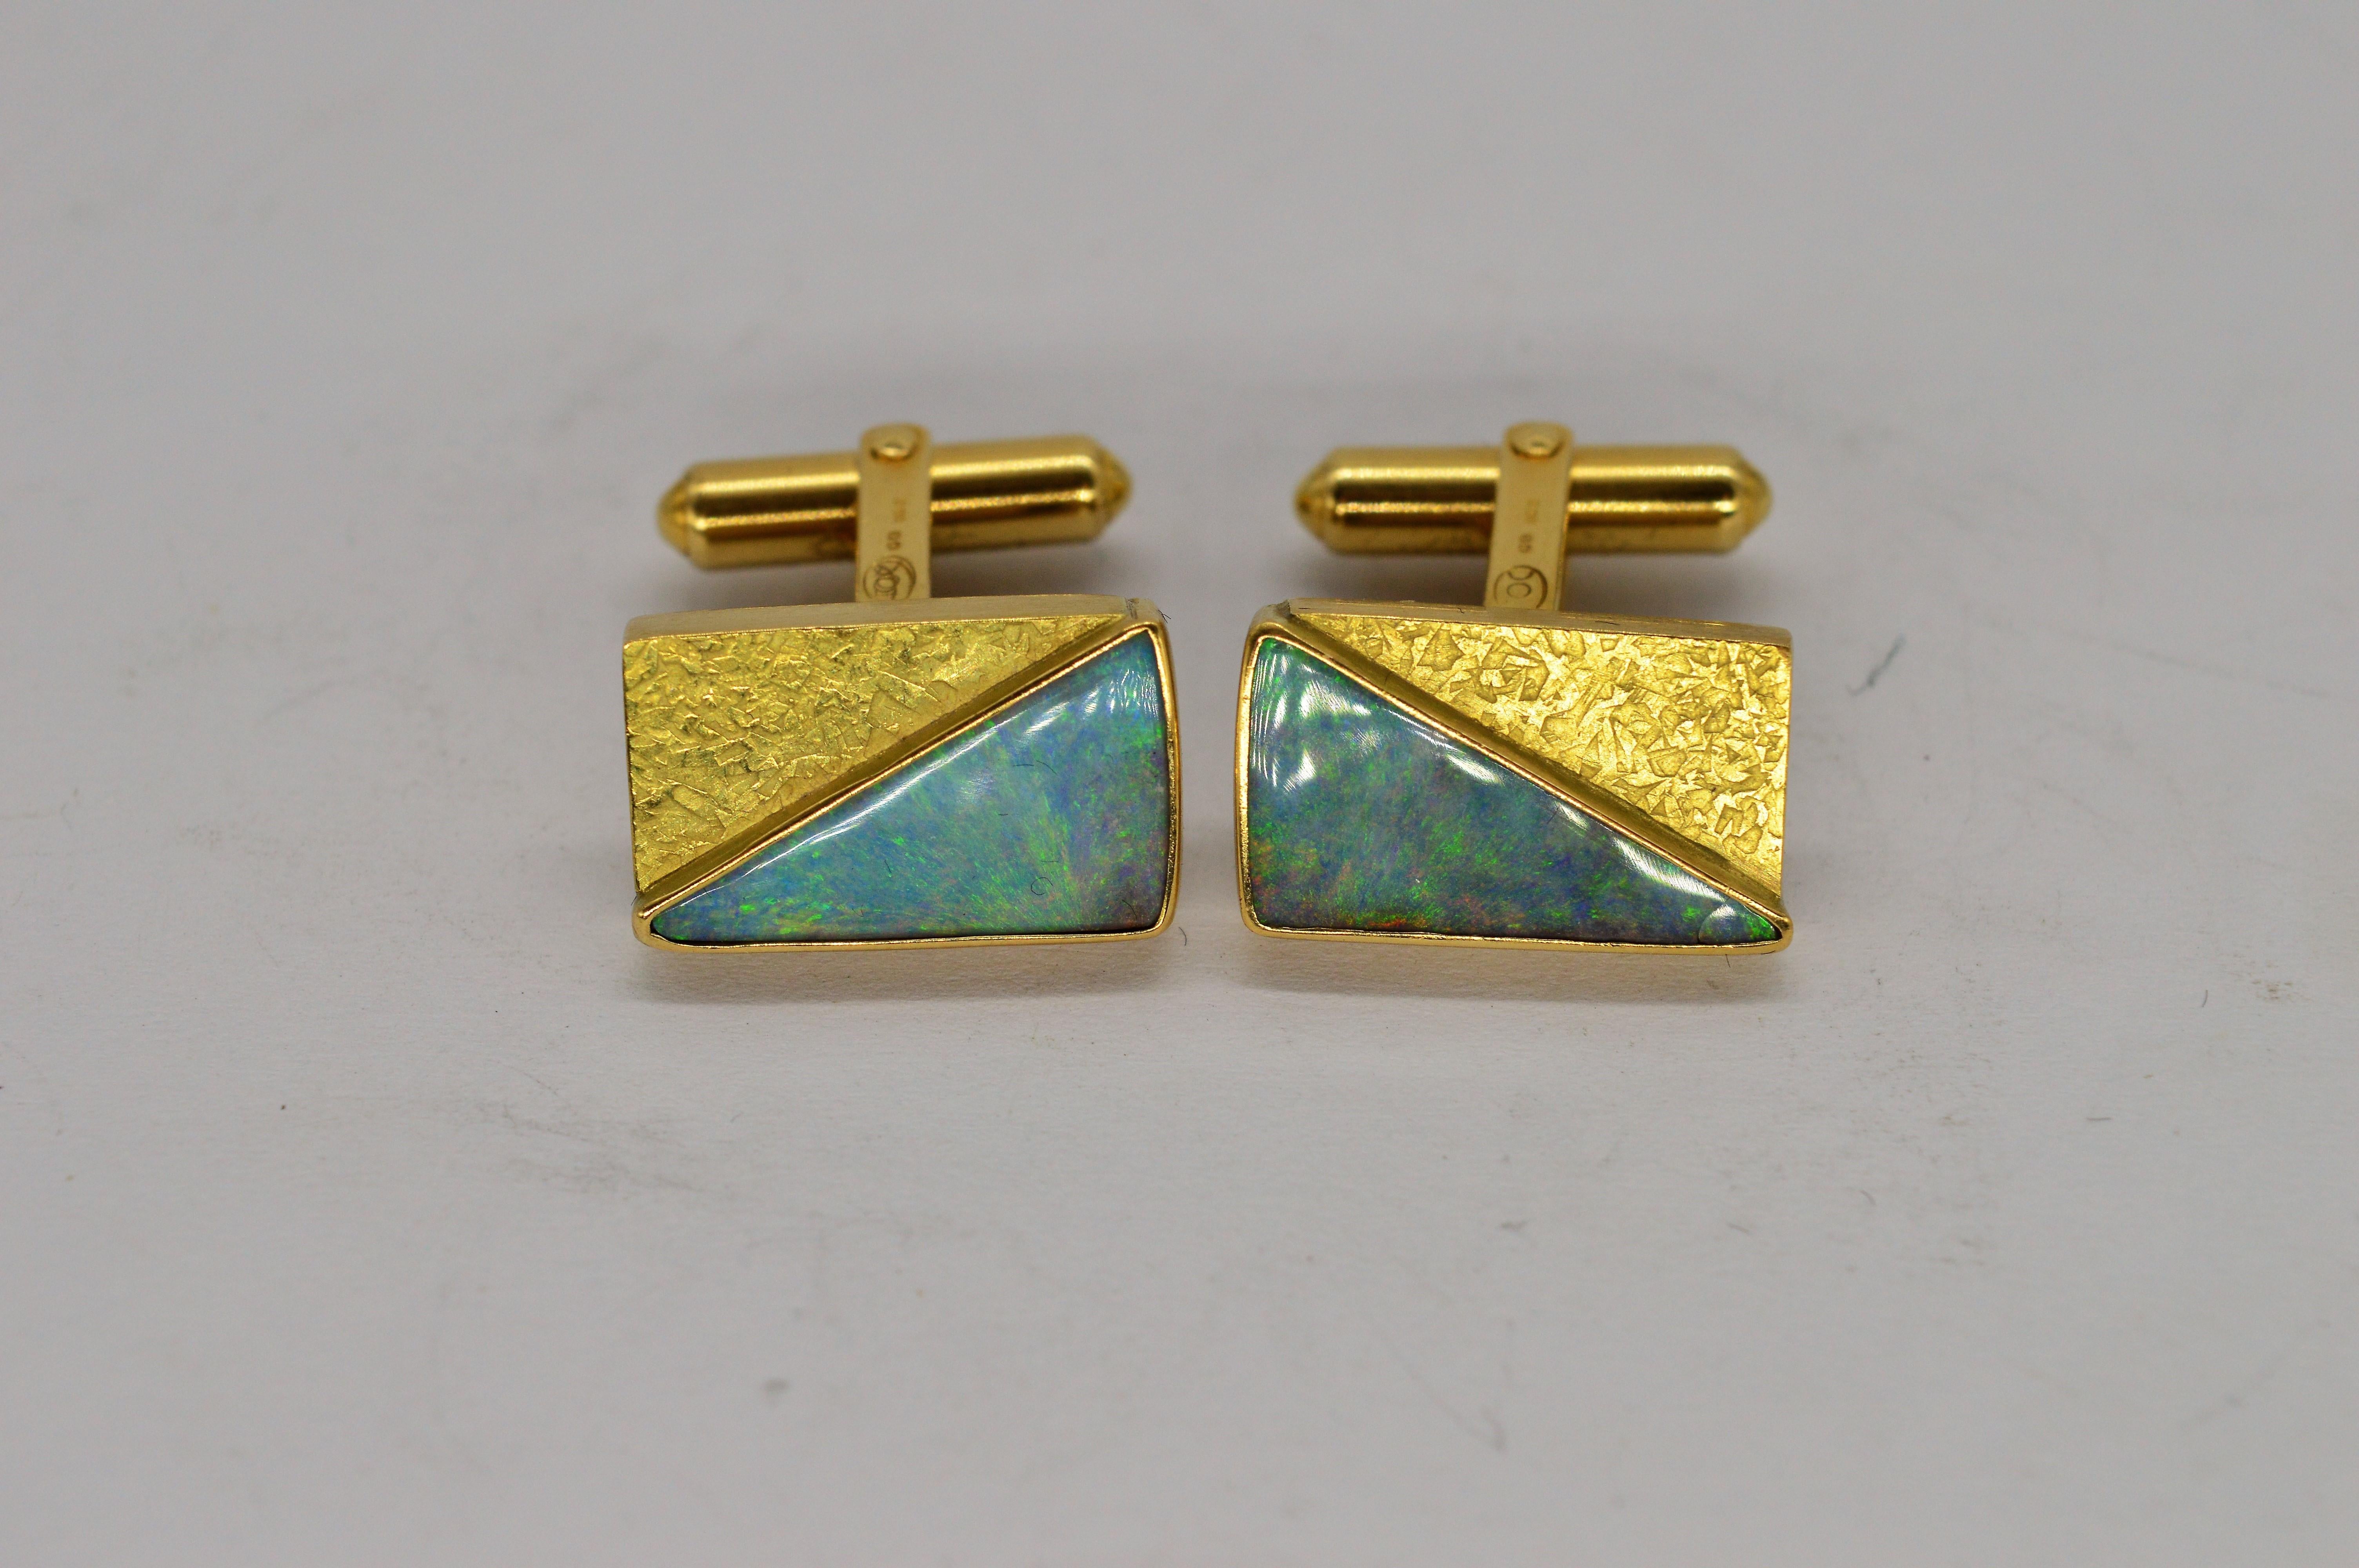 A set of hand crafted 18ct gold Black Opal doublet cufflinks 

Reminiscent of the brutalist styling, these hand crafted cufflinks feature perfectly matched black opal triplets of incredible quality

11.79g

We have sold to the set of Hit shows like